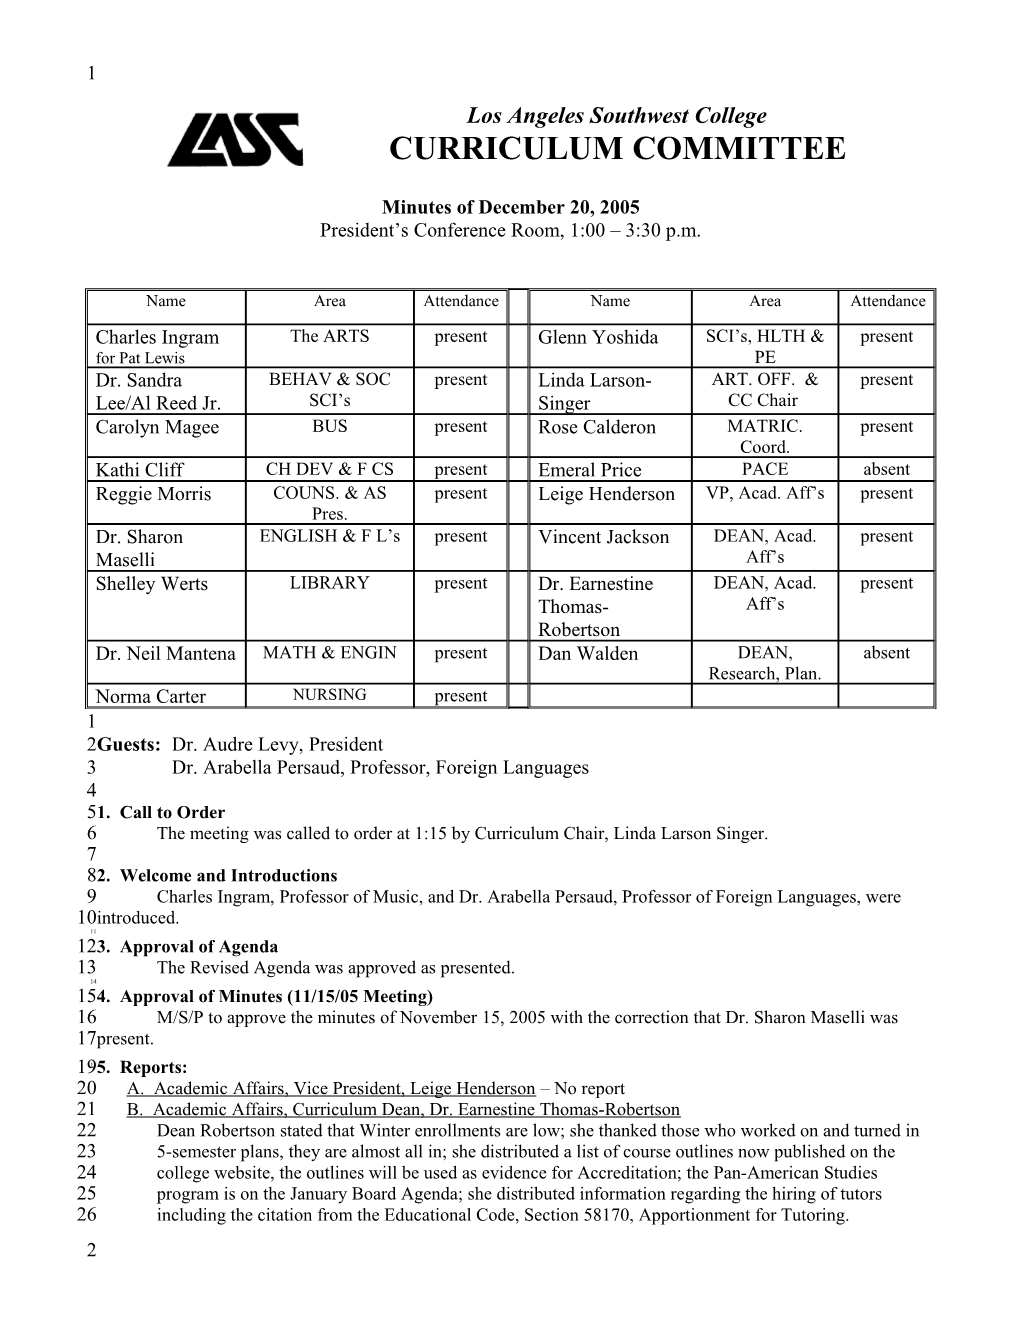 Los Angeles Southwest College, Curriculum Committee, Minutes of December 20, 2005 Page 1 of 3